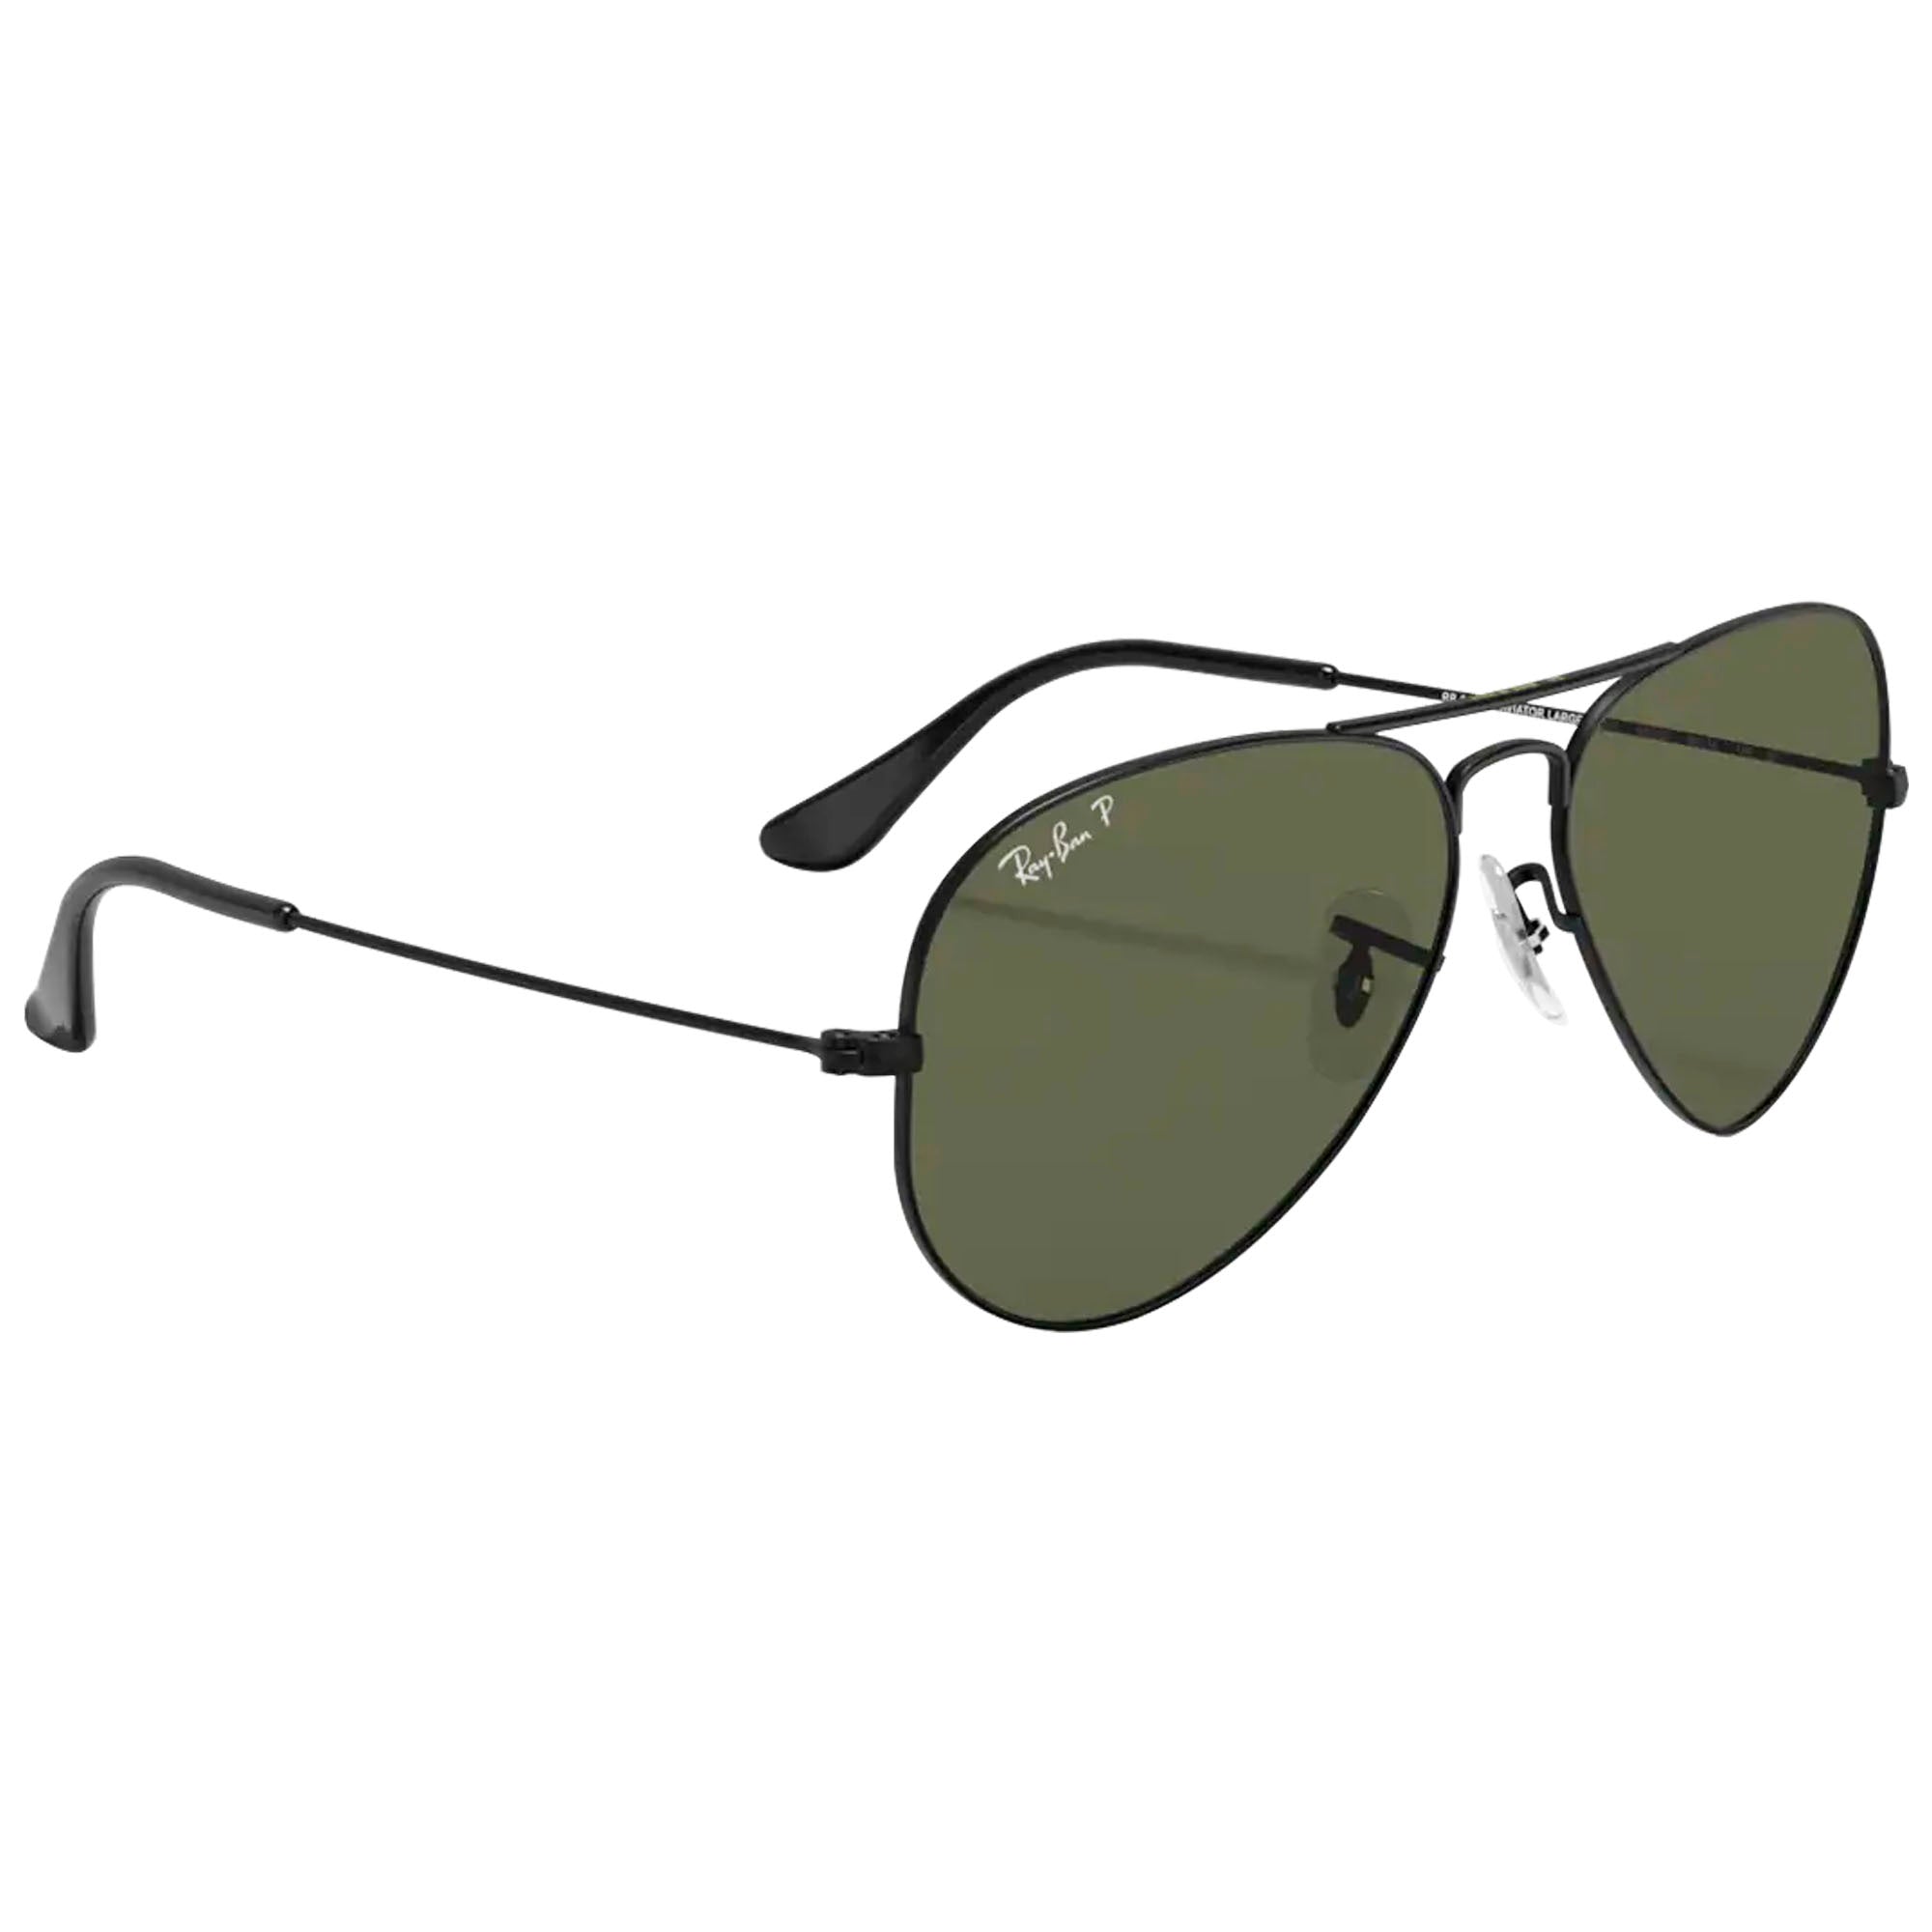 Ray-Ban RB3025-002/58 Aviator Sunglasses Polished Black Frame w Green Solid Lens RB3025